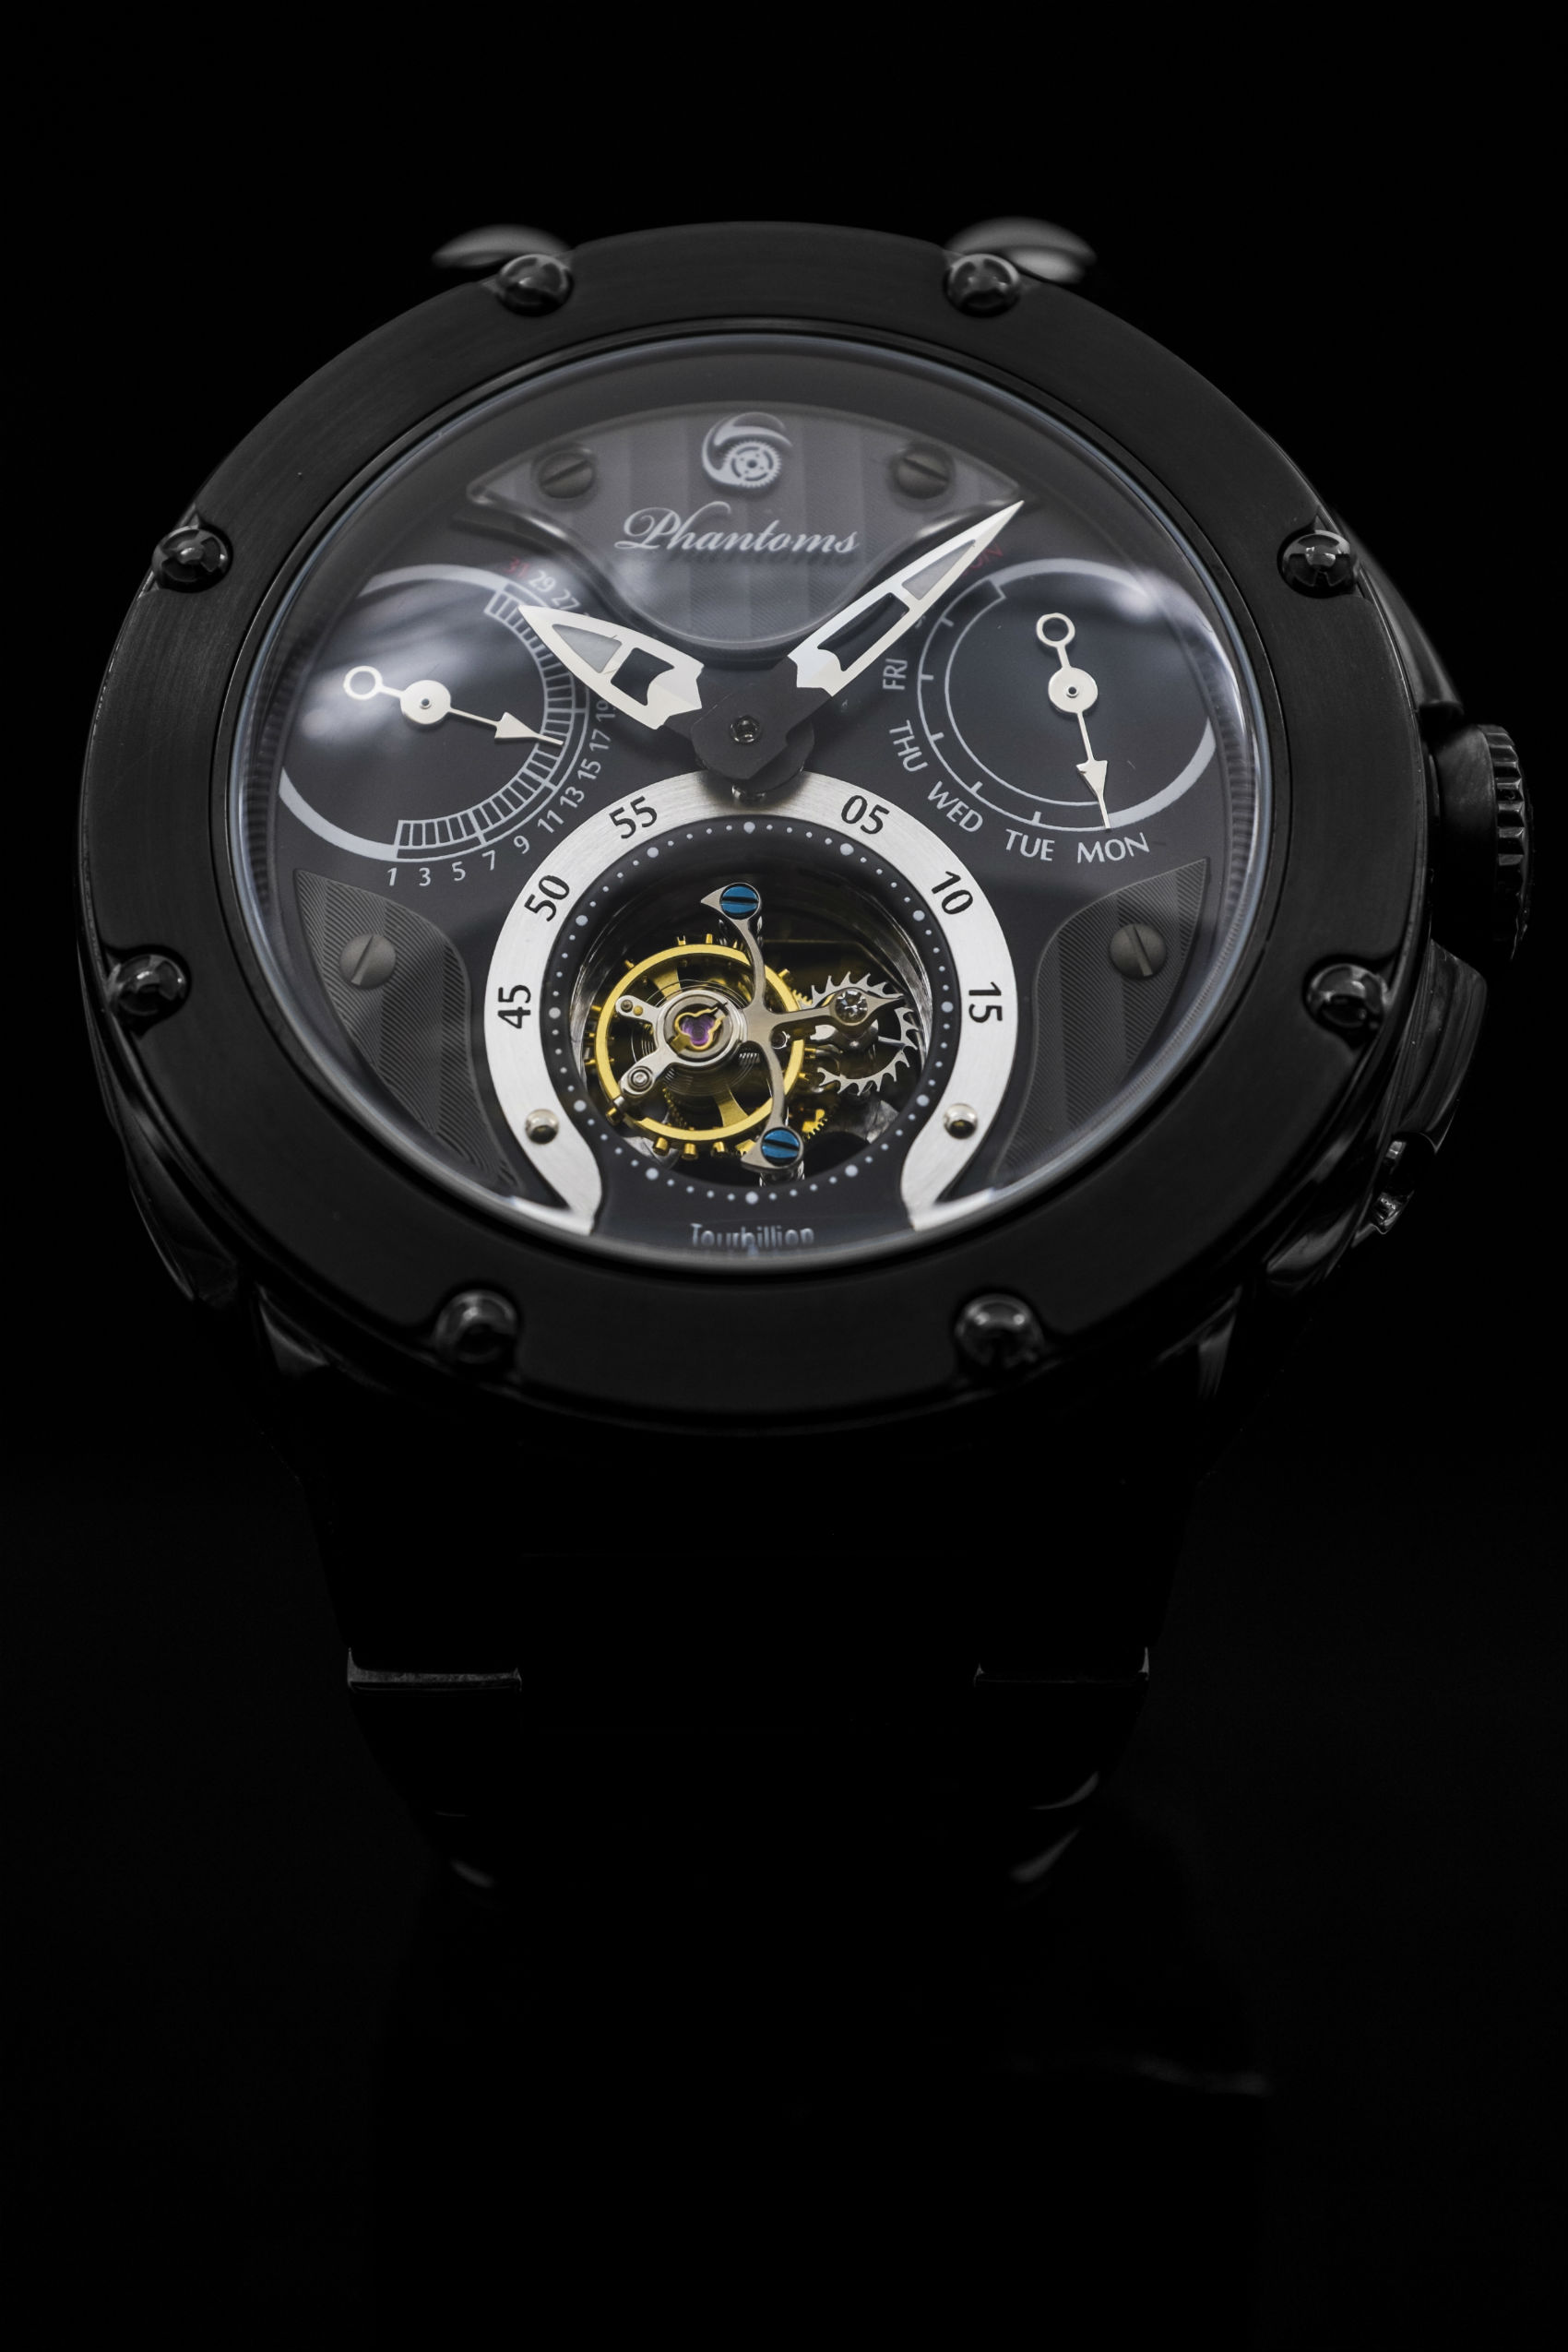 Phantoms Tourbillon Watch Brand, The World's First Mechanical Soul. Men and Women Luxury Elegant Sporty Watches Collection. Based In Hong Kong, Chinese Watch Making At its Finest.